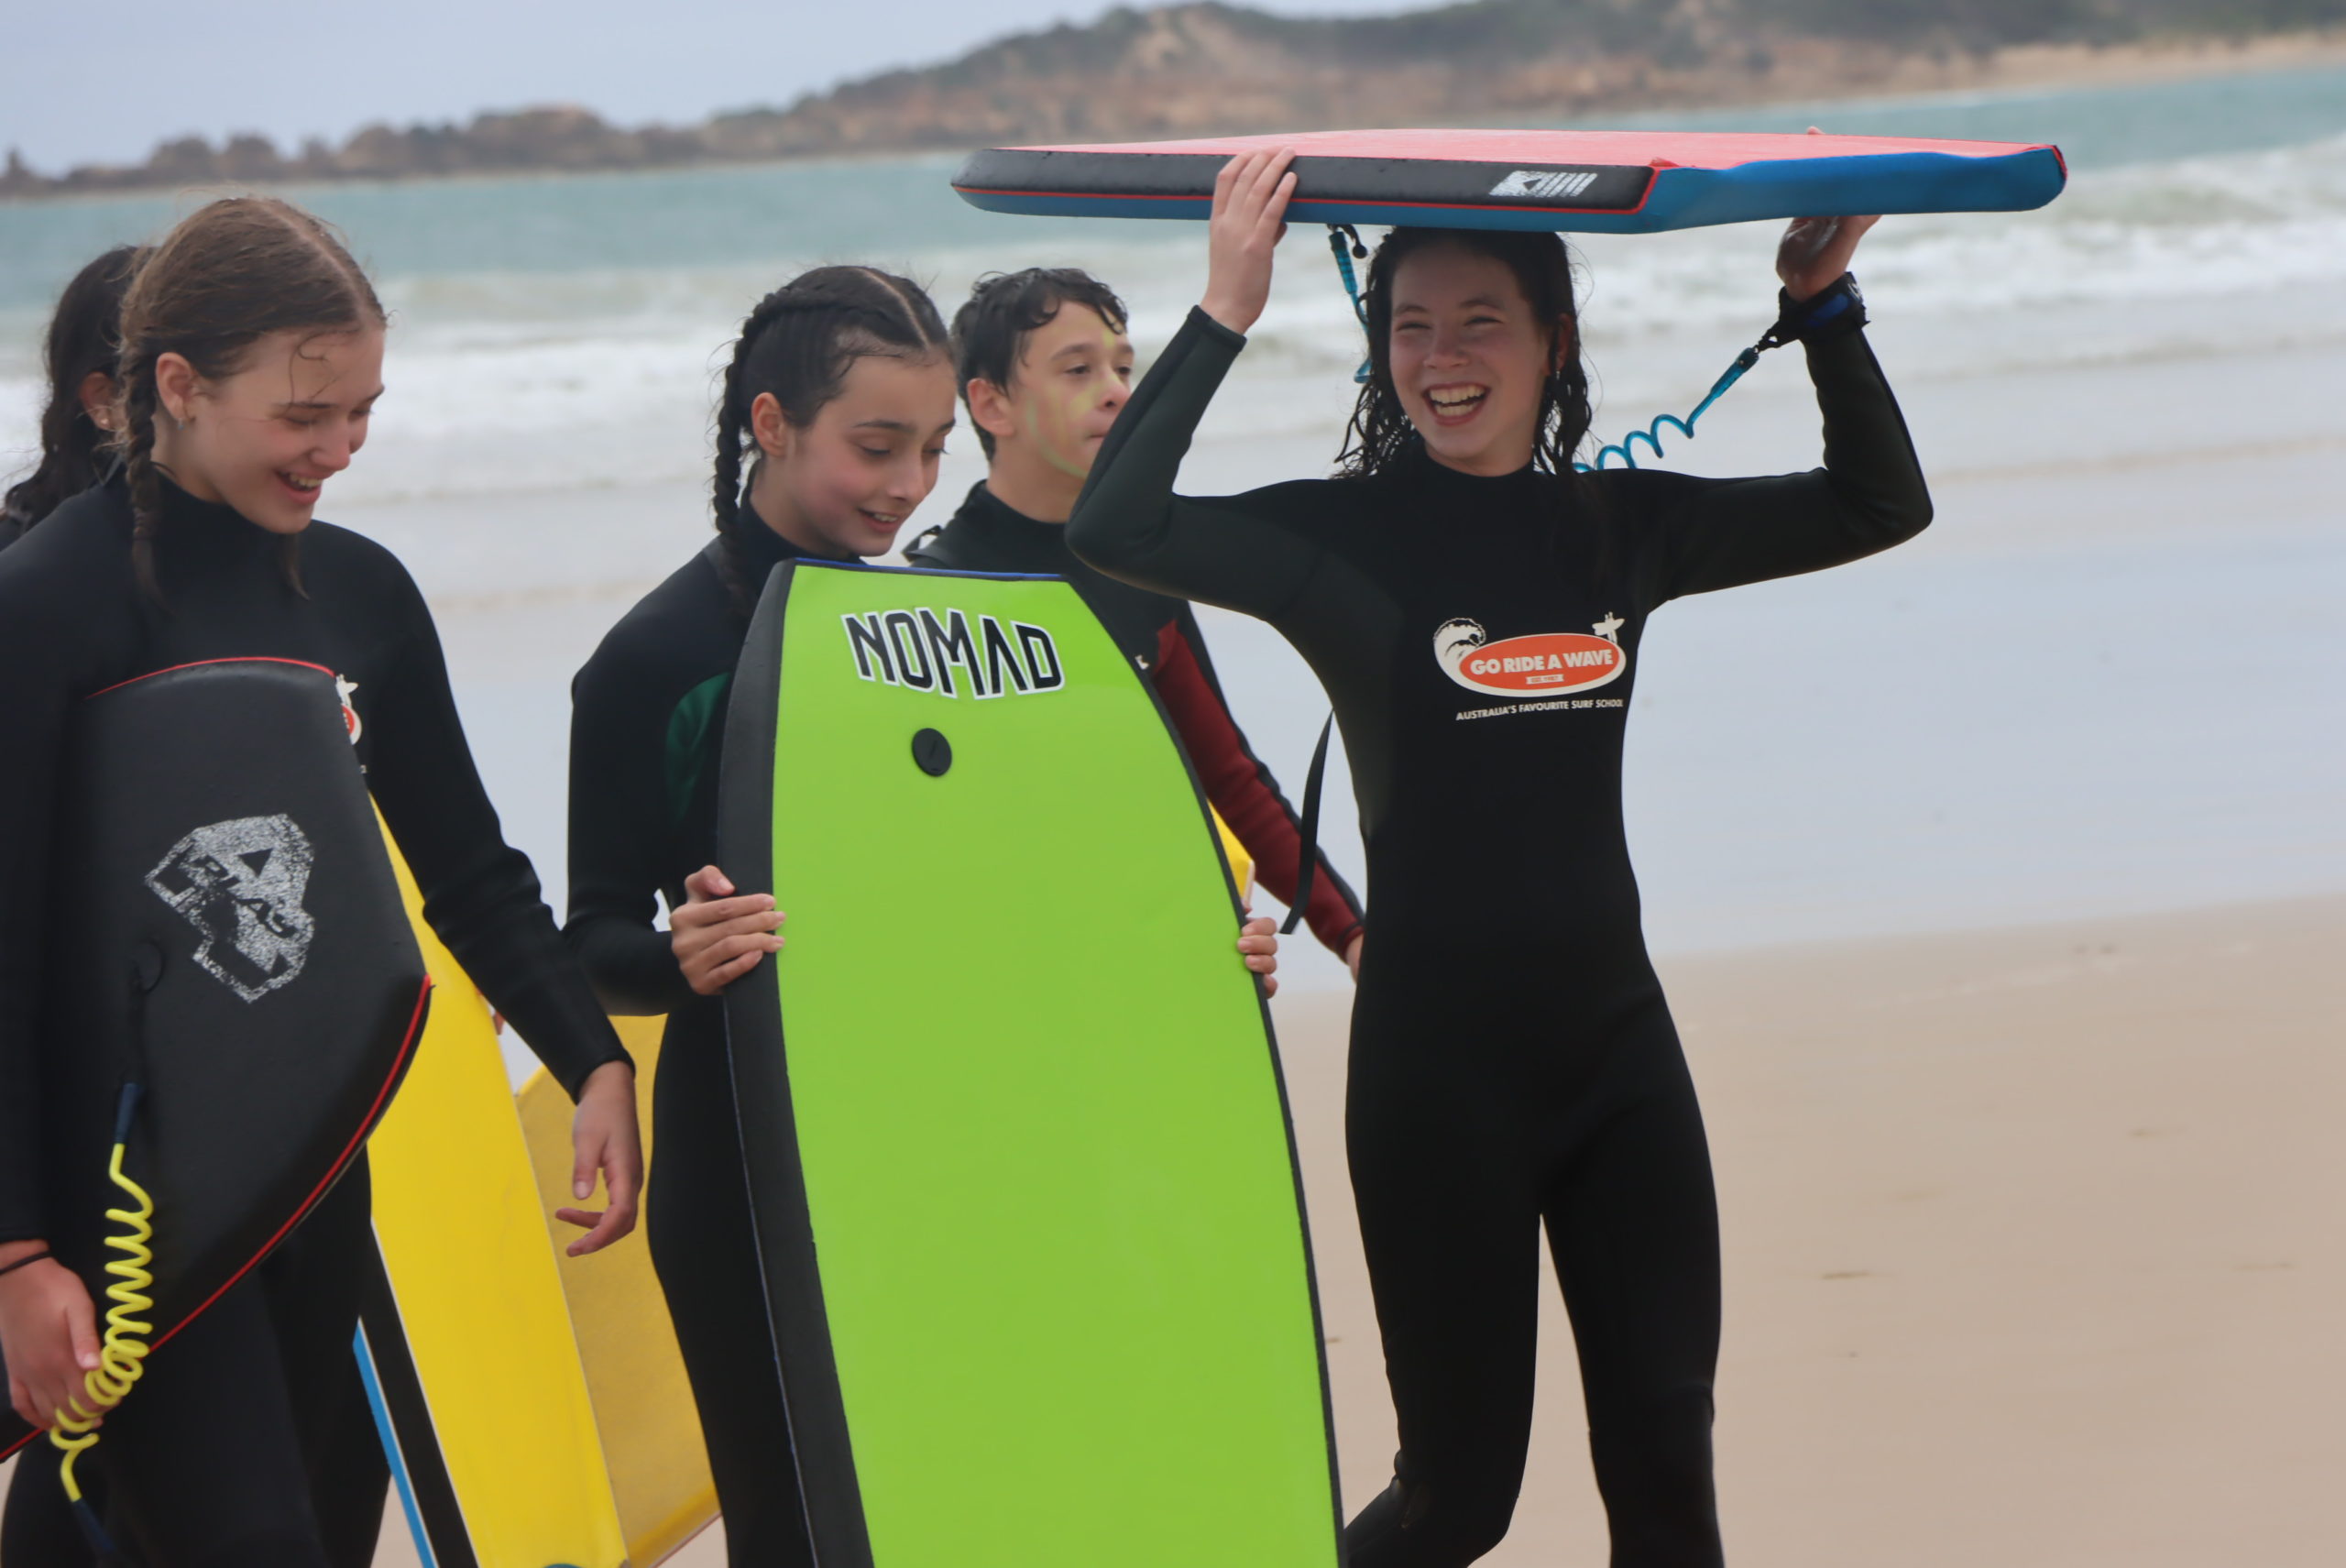 Five Year 7 students are on the beach. Two are holding green and yellow board boards against their bodies and one is holding a body board over their head. They are smiling and on the beach.